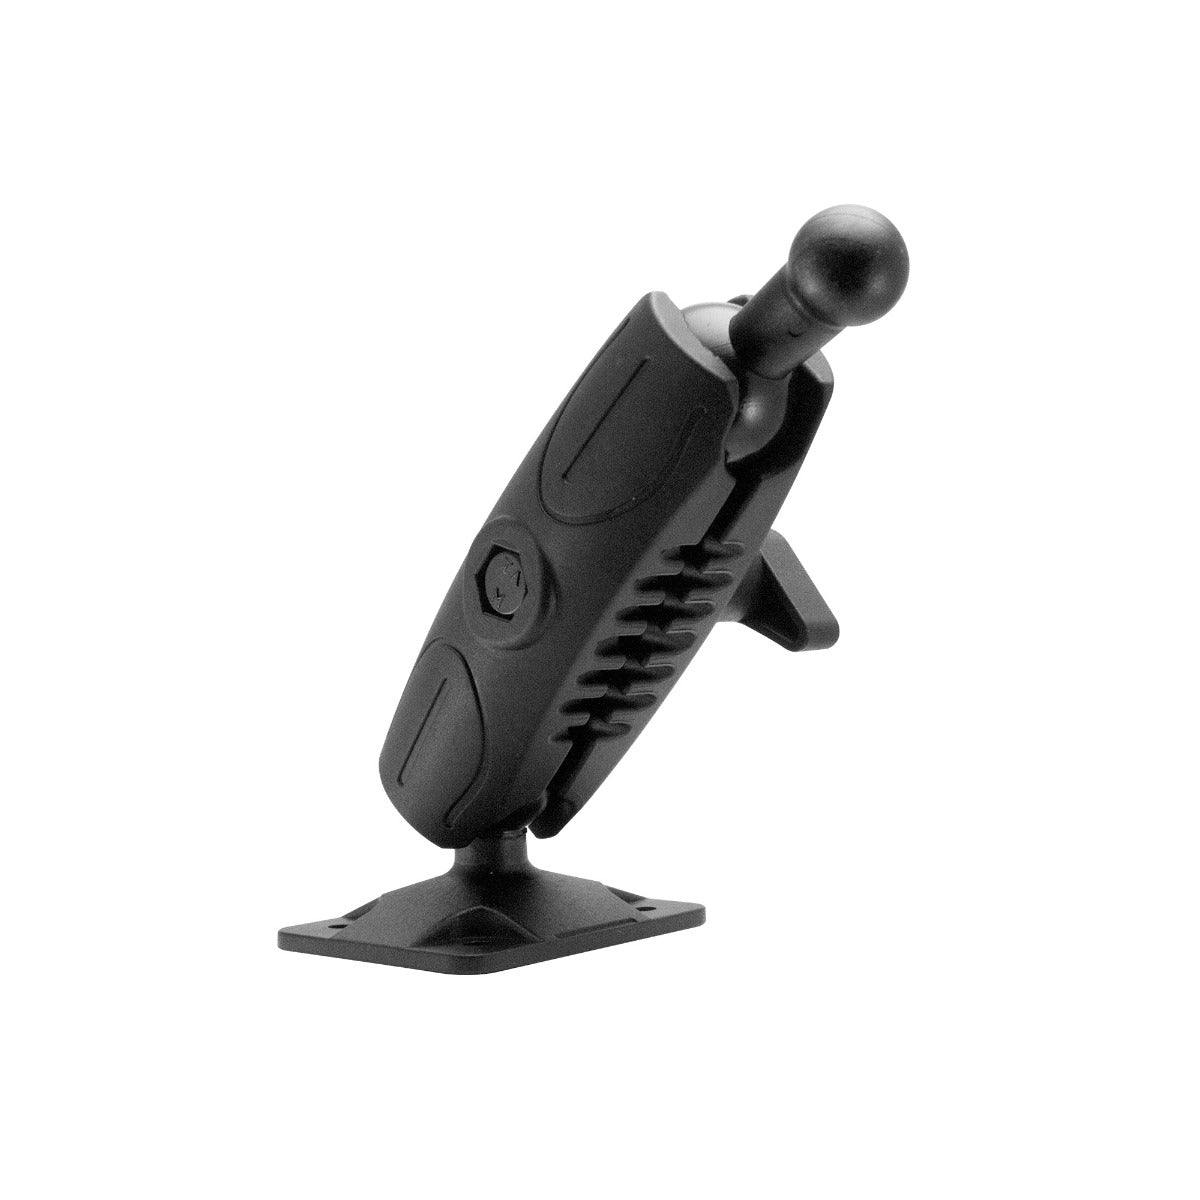 iBOLT 17mm Dual Ball to AMPs Drill Base Mount compatible w/ Garmin GPS and iBOLT Phone Holders